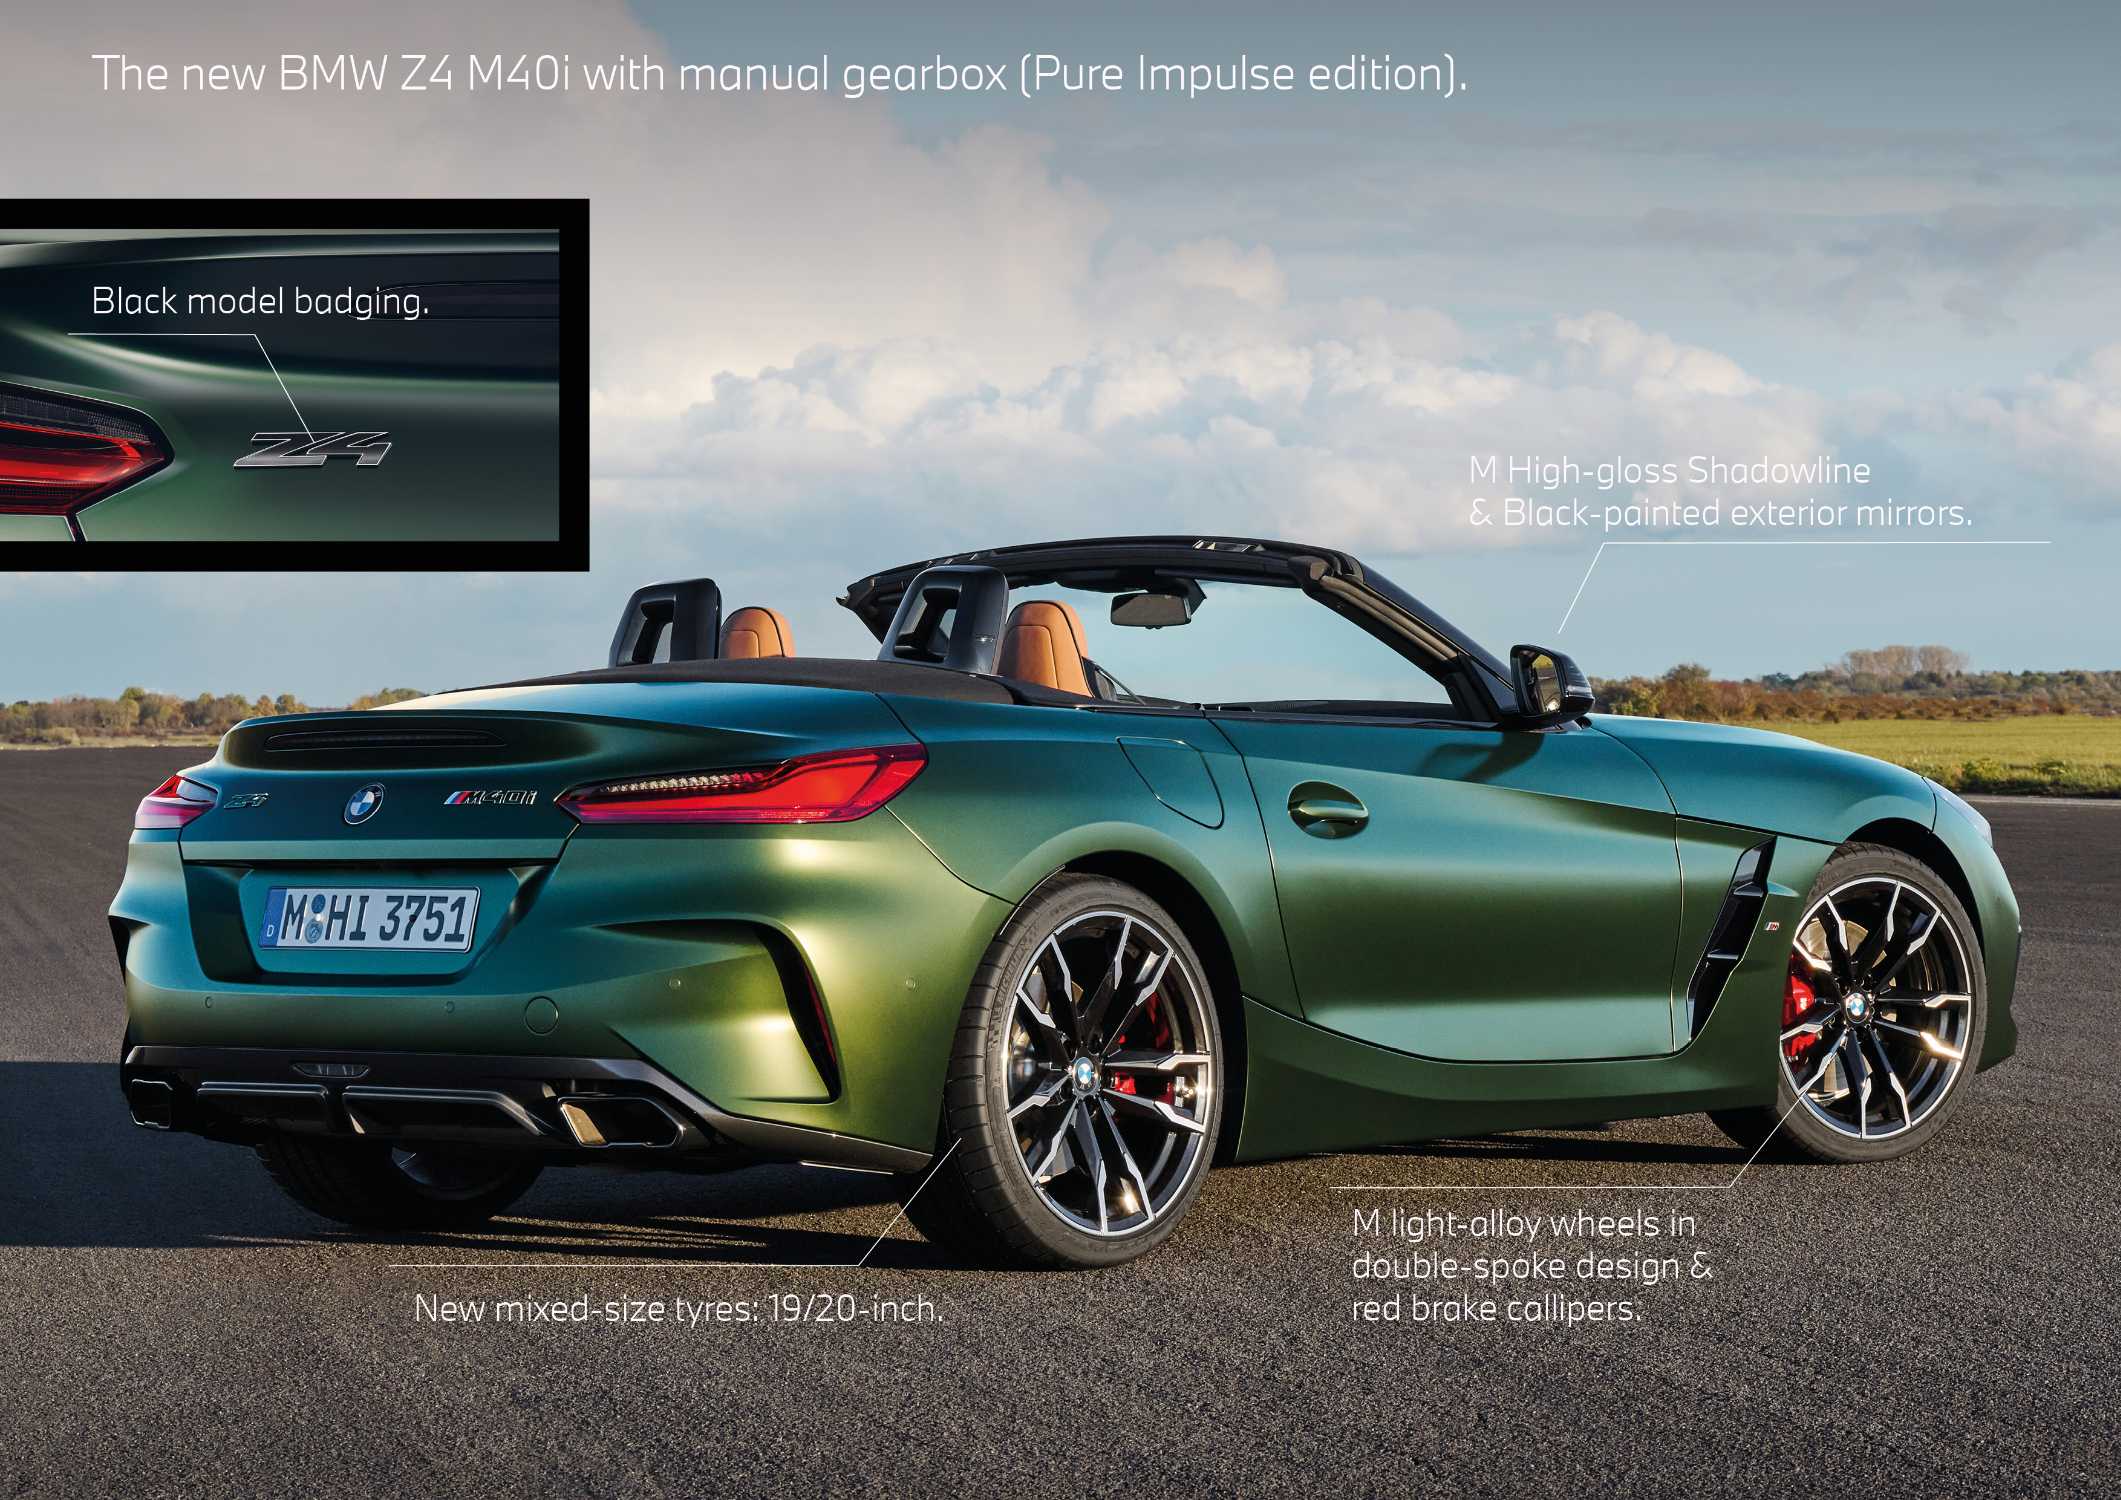 The BMW Z4 M40i with manual gearbox - Highlights